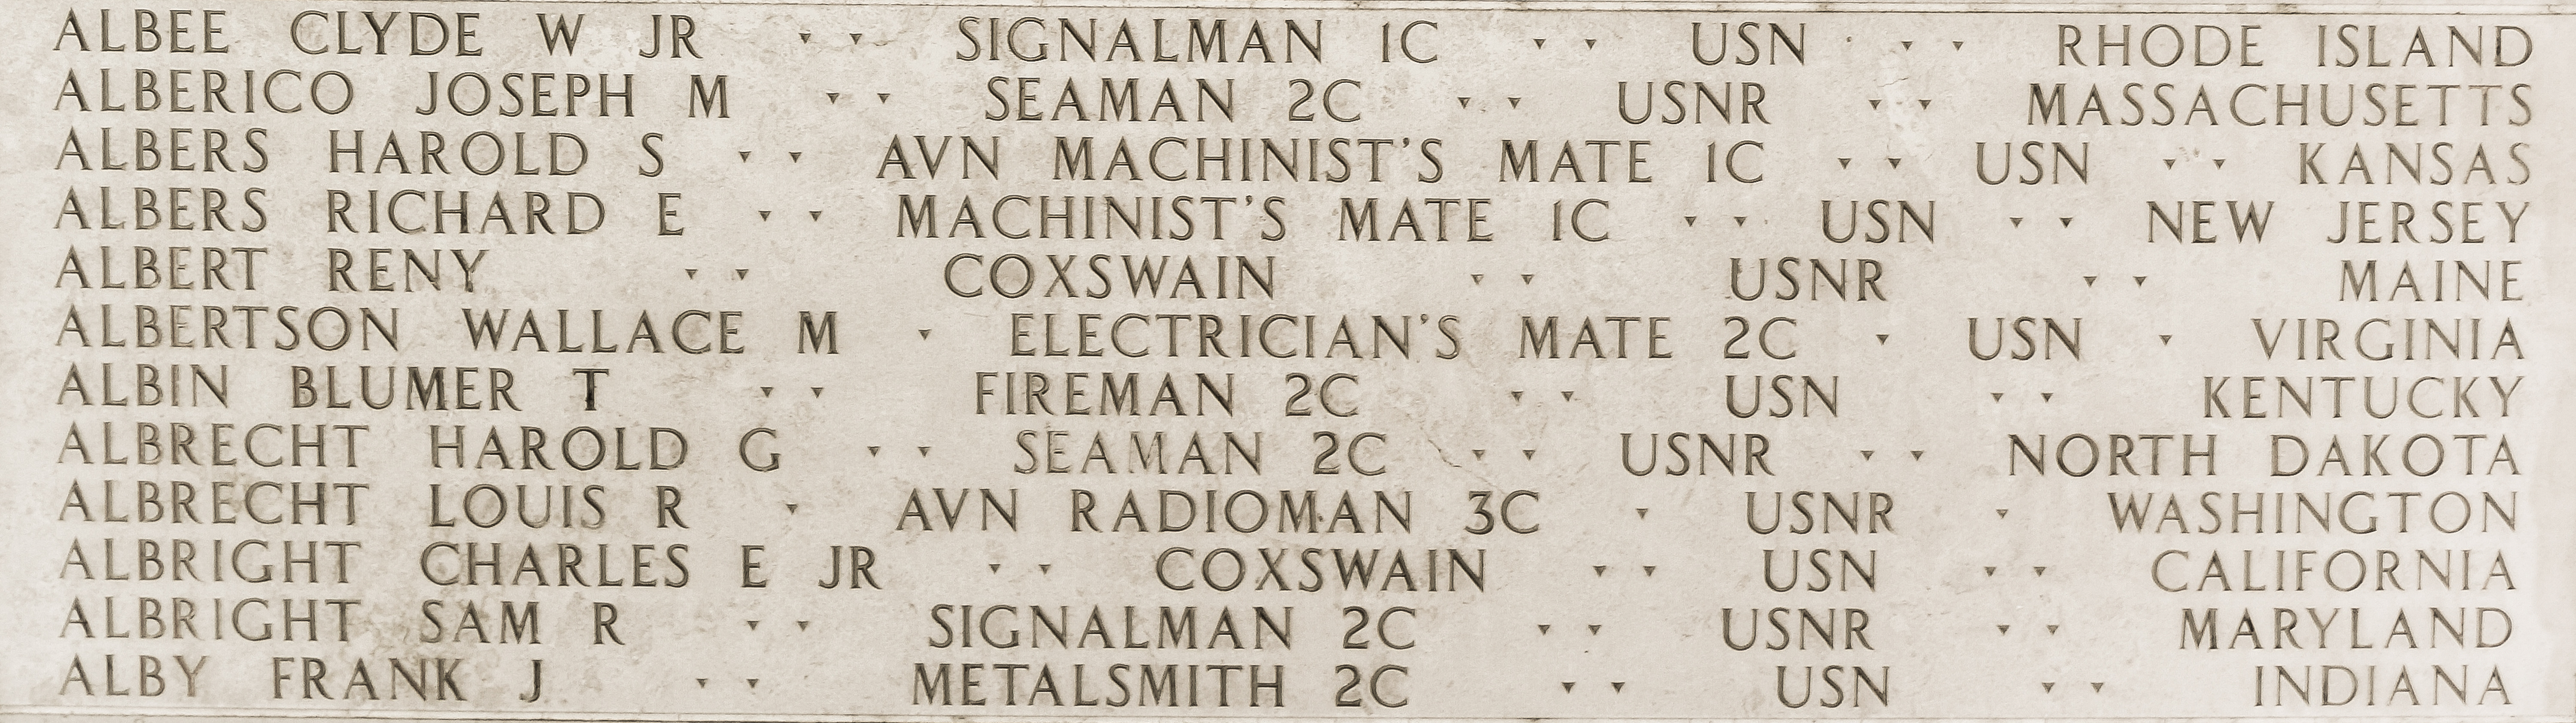 Wallace M. Albertson, Electrician's Mate Second Class